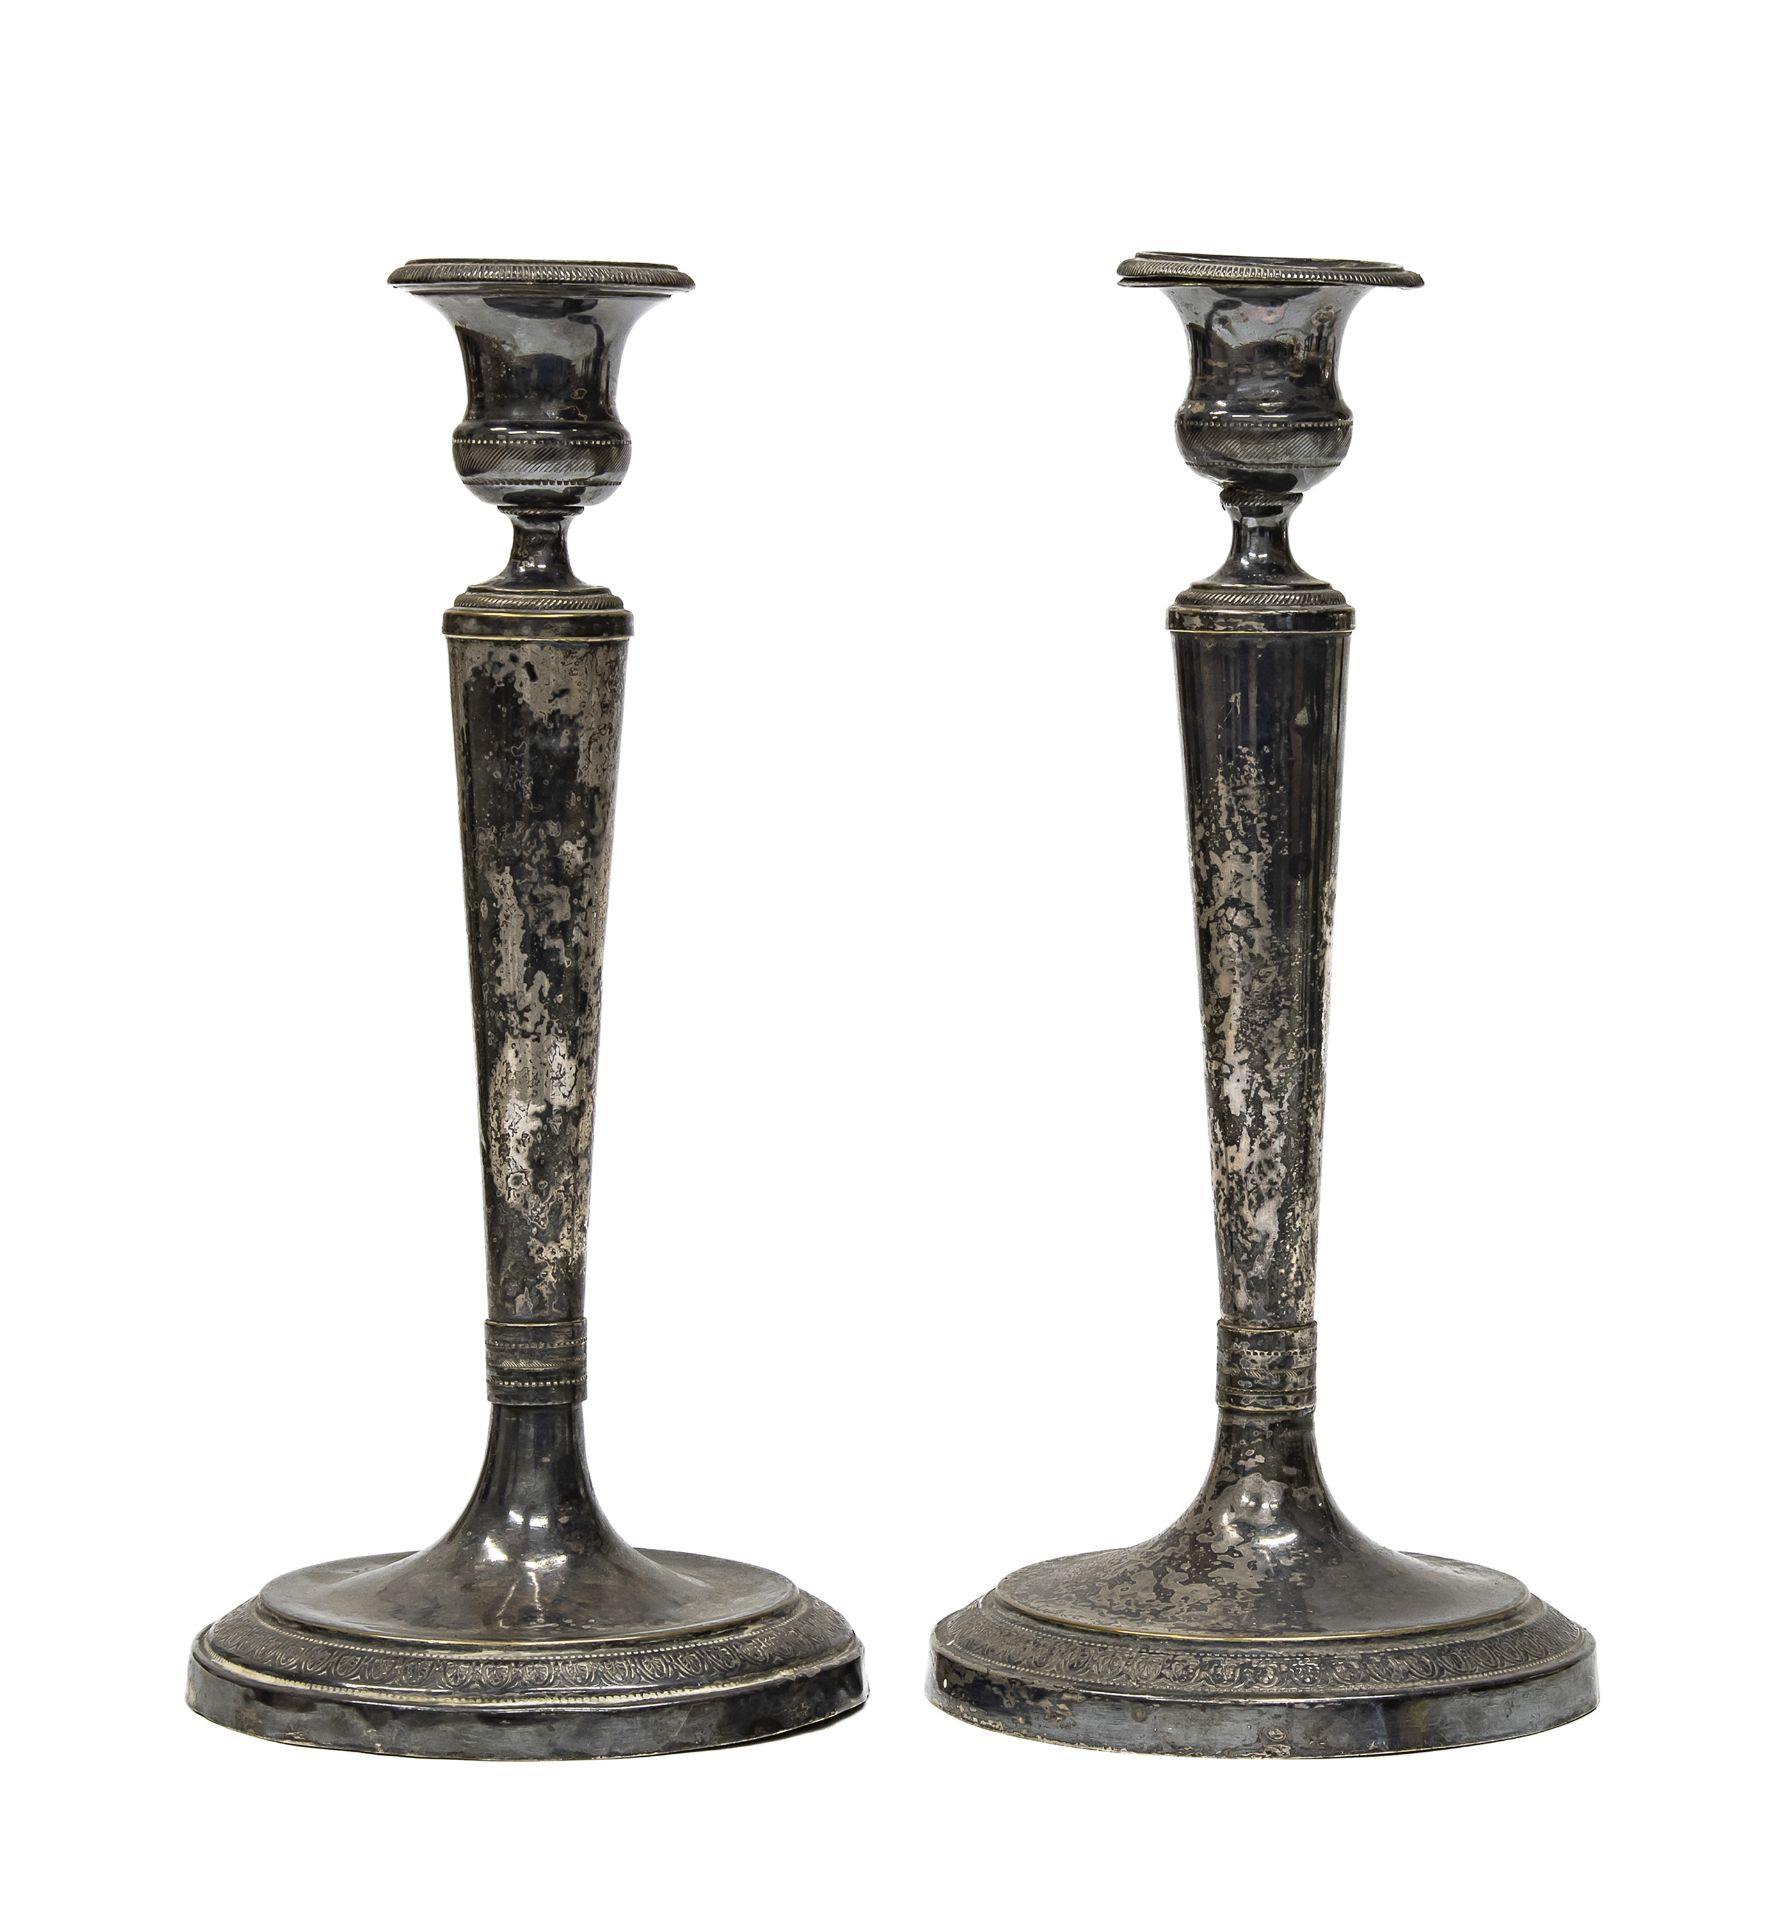 PAIR OF SILVER-PLATED METAL CANDLESTICKS ITALY approx. 1830.